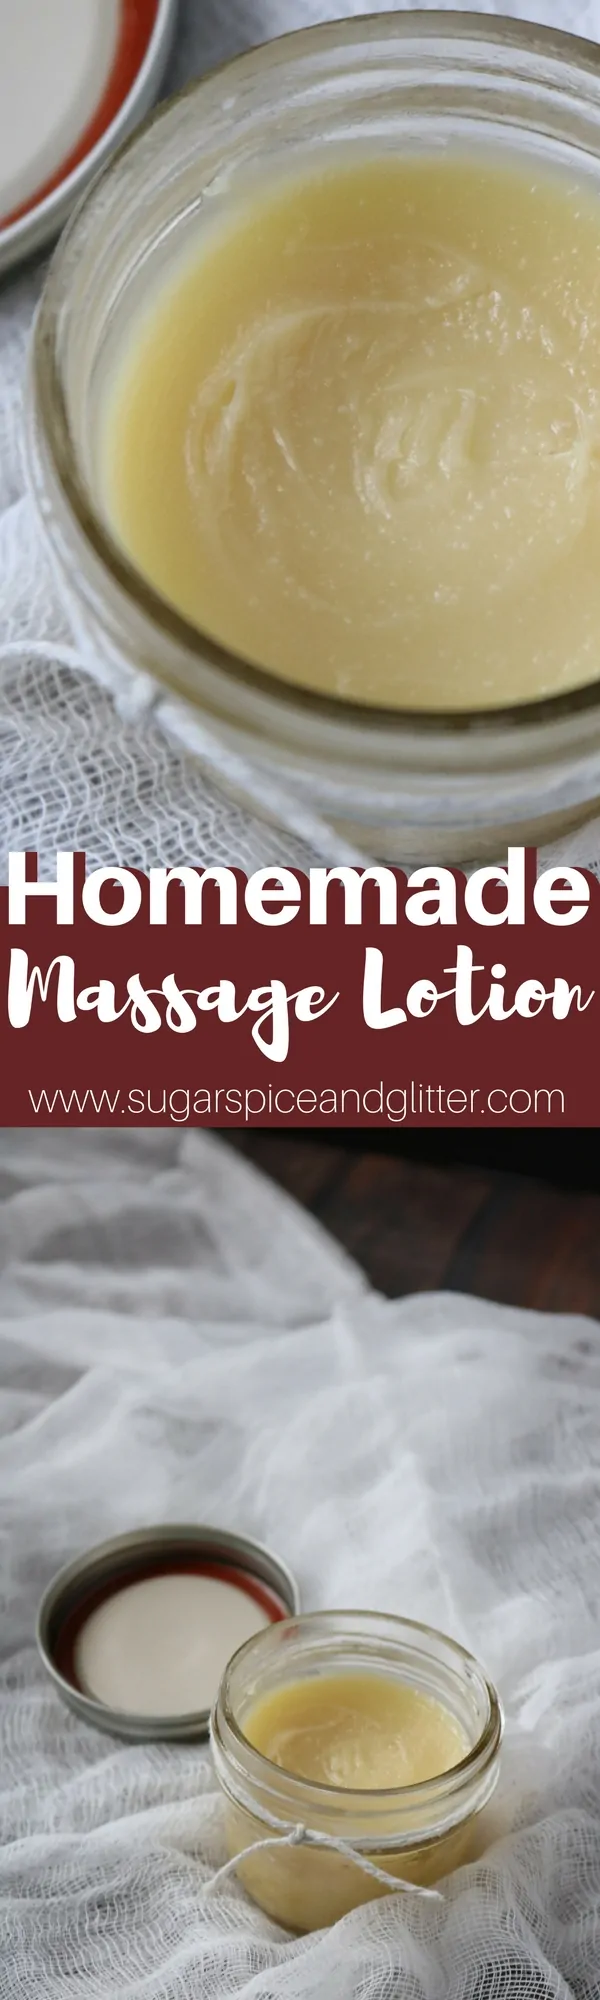 Homemade Massage Lotion perfect for bedtime back rubs or a relaxing foot massage. Massage oil made with essential oils, beeswax, shea butter and coconut oil